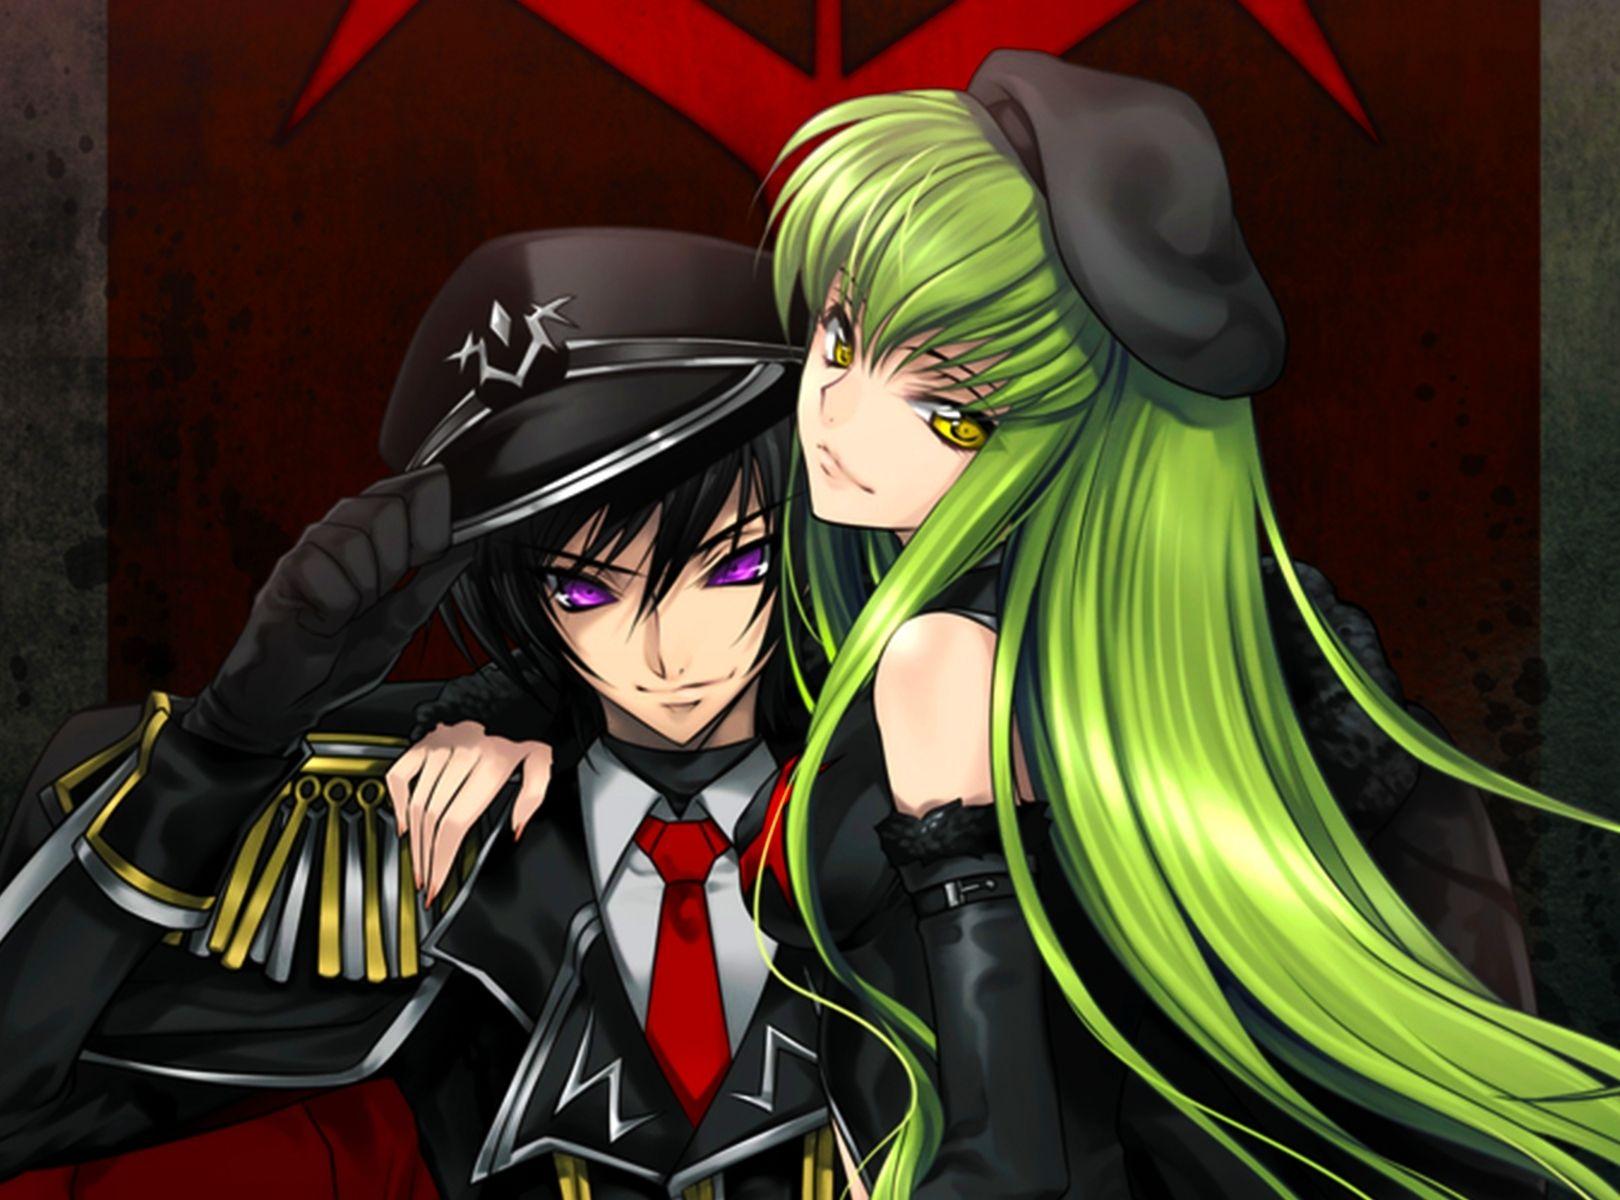 C.C. and Lelouch fron Code Geass wallpaper. Anime and game